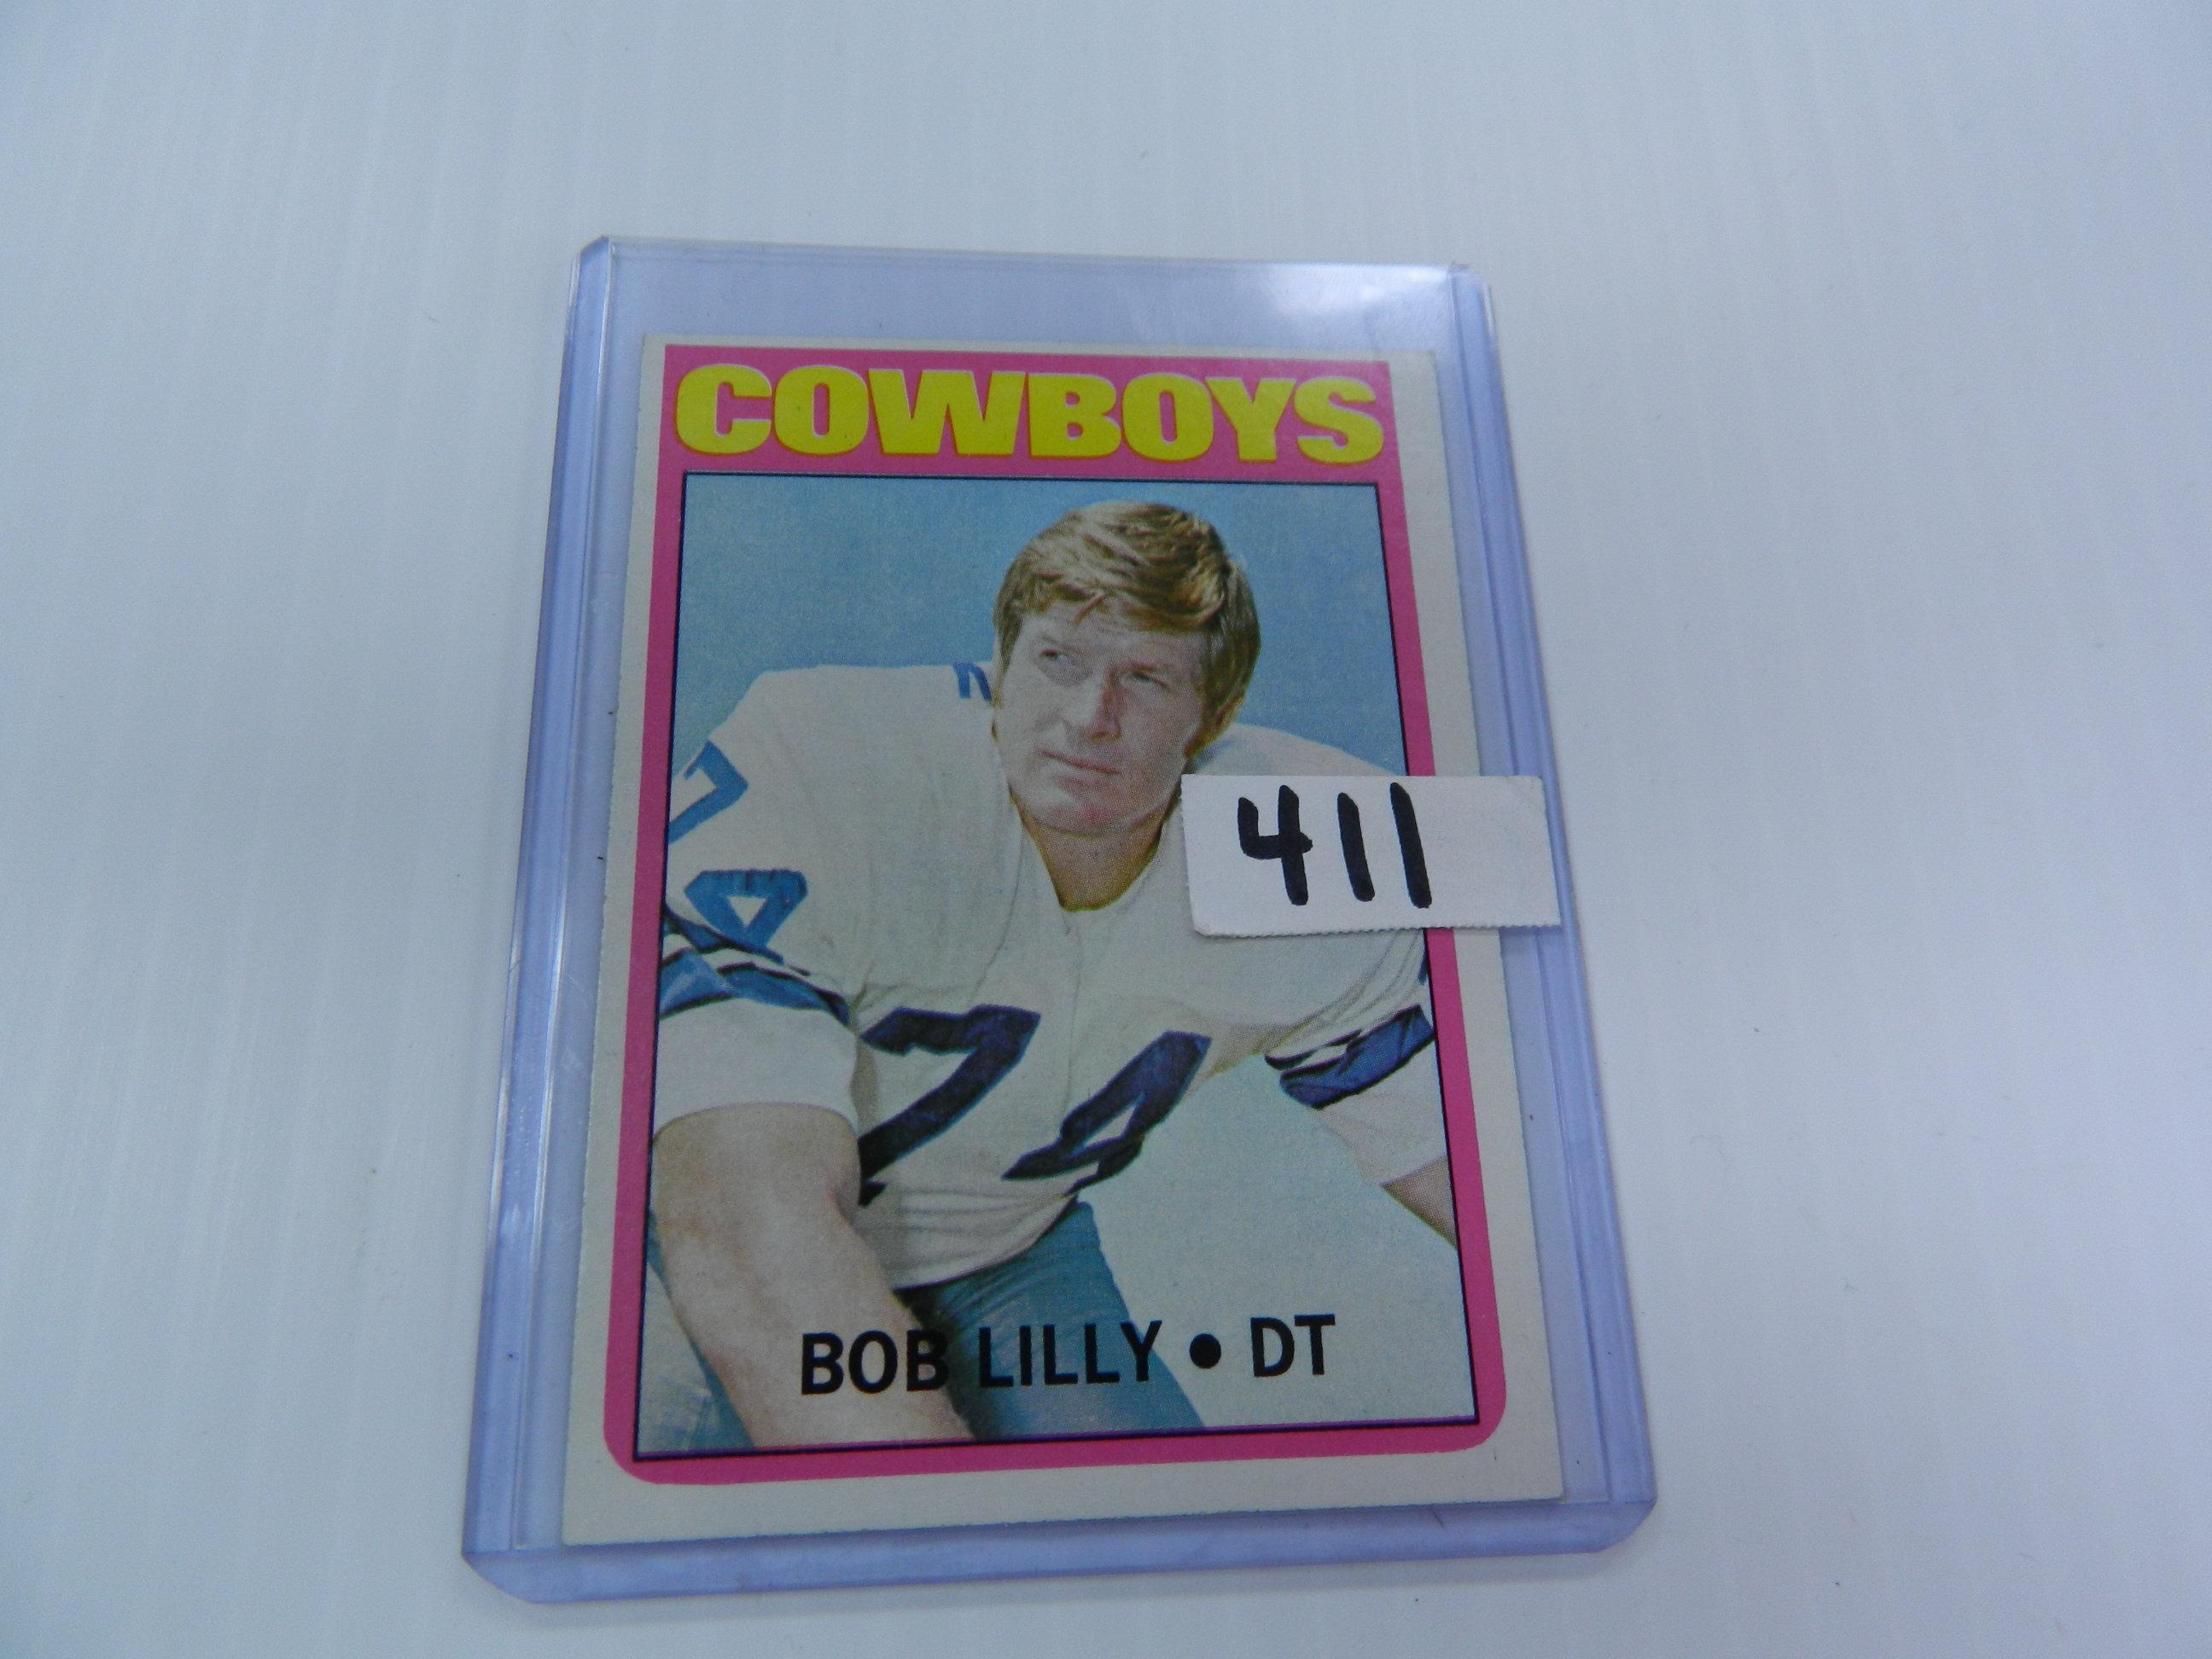 1972 Topps Football #145 Bob Lilly DT for the Dallas Cowboys 1960's - 1970's, We Will Ship